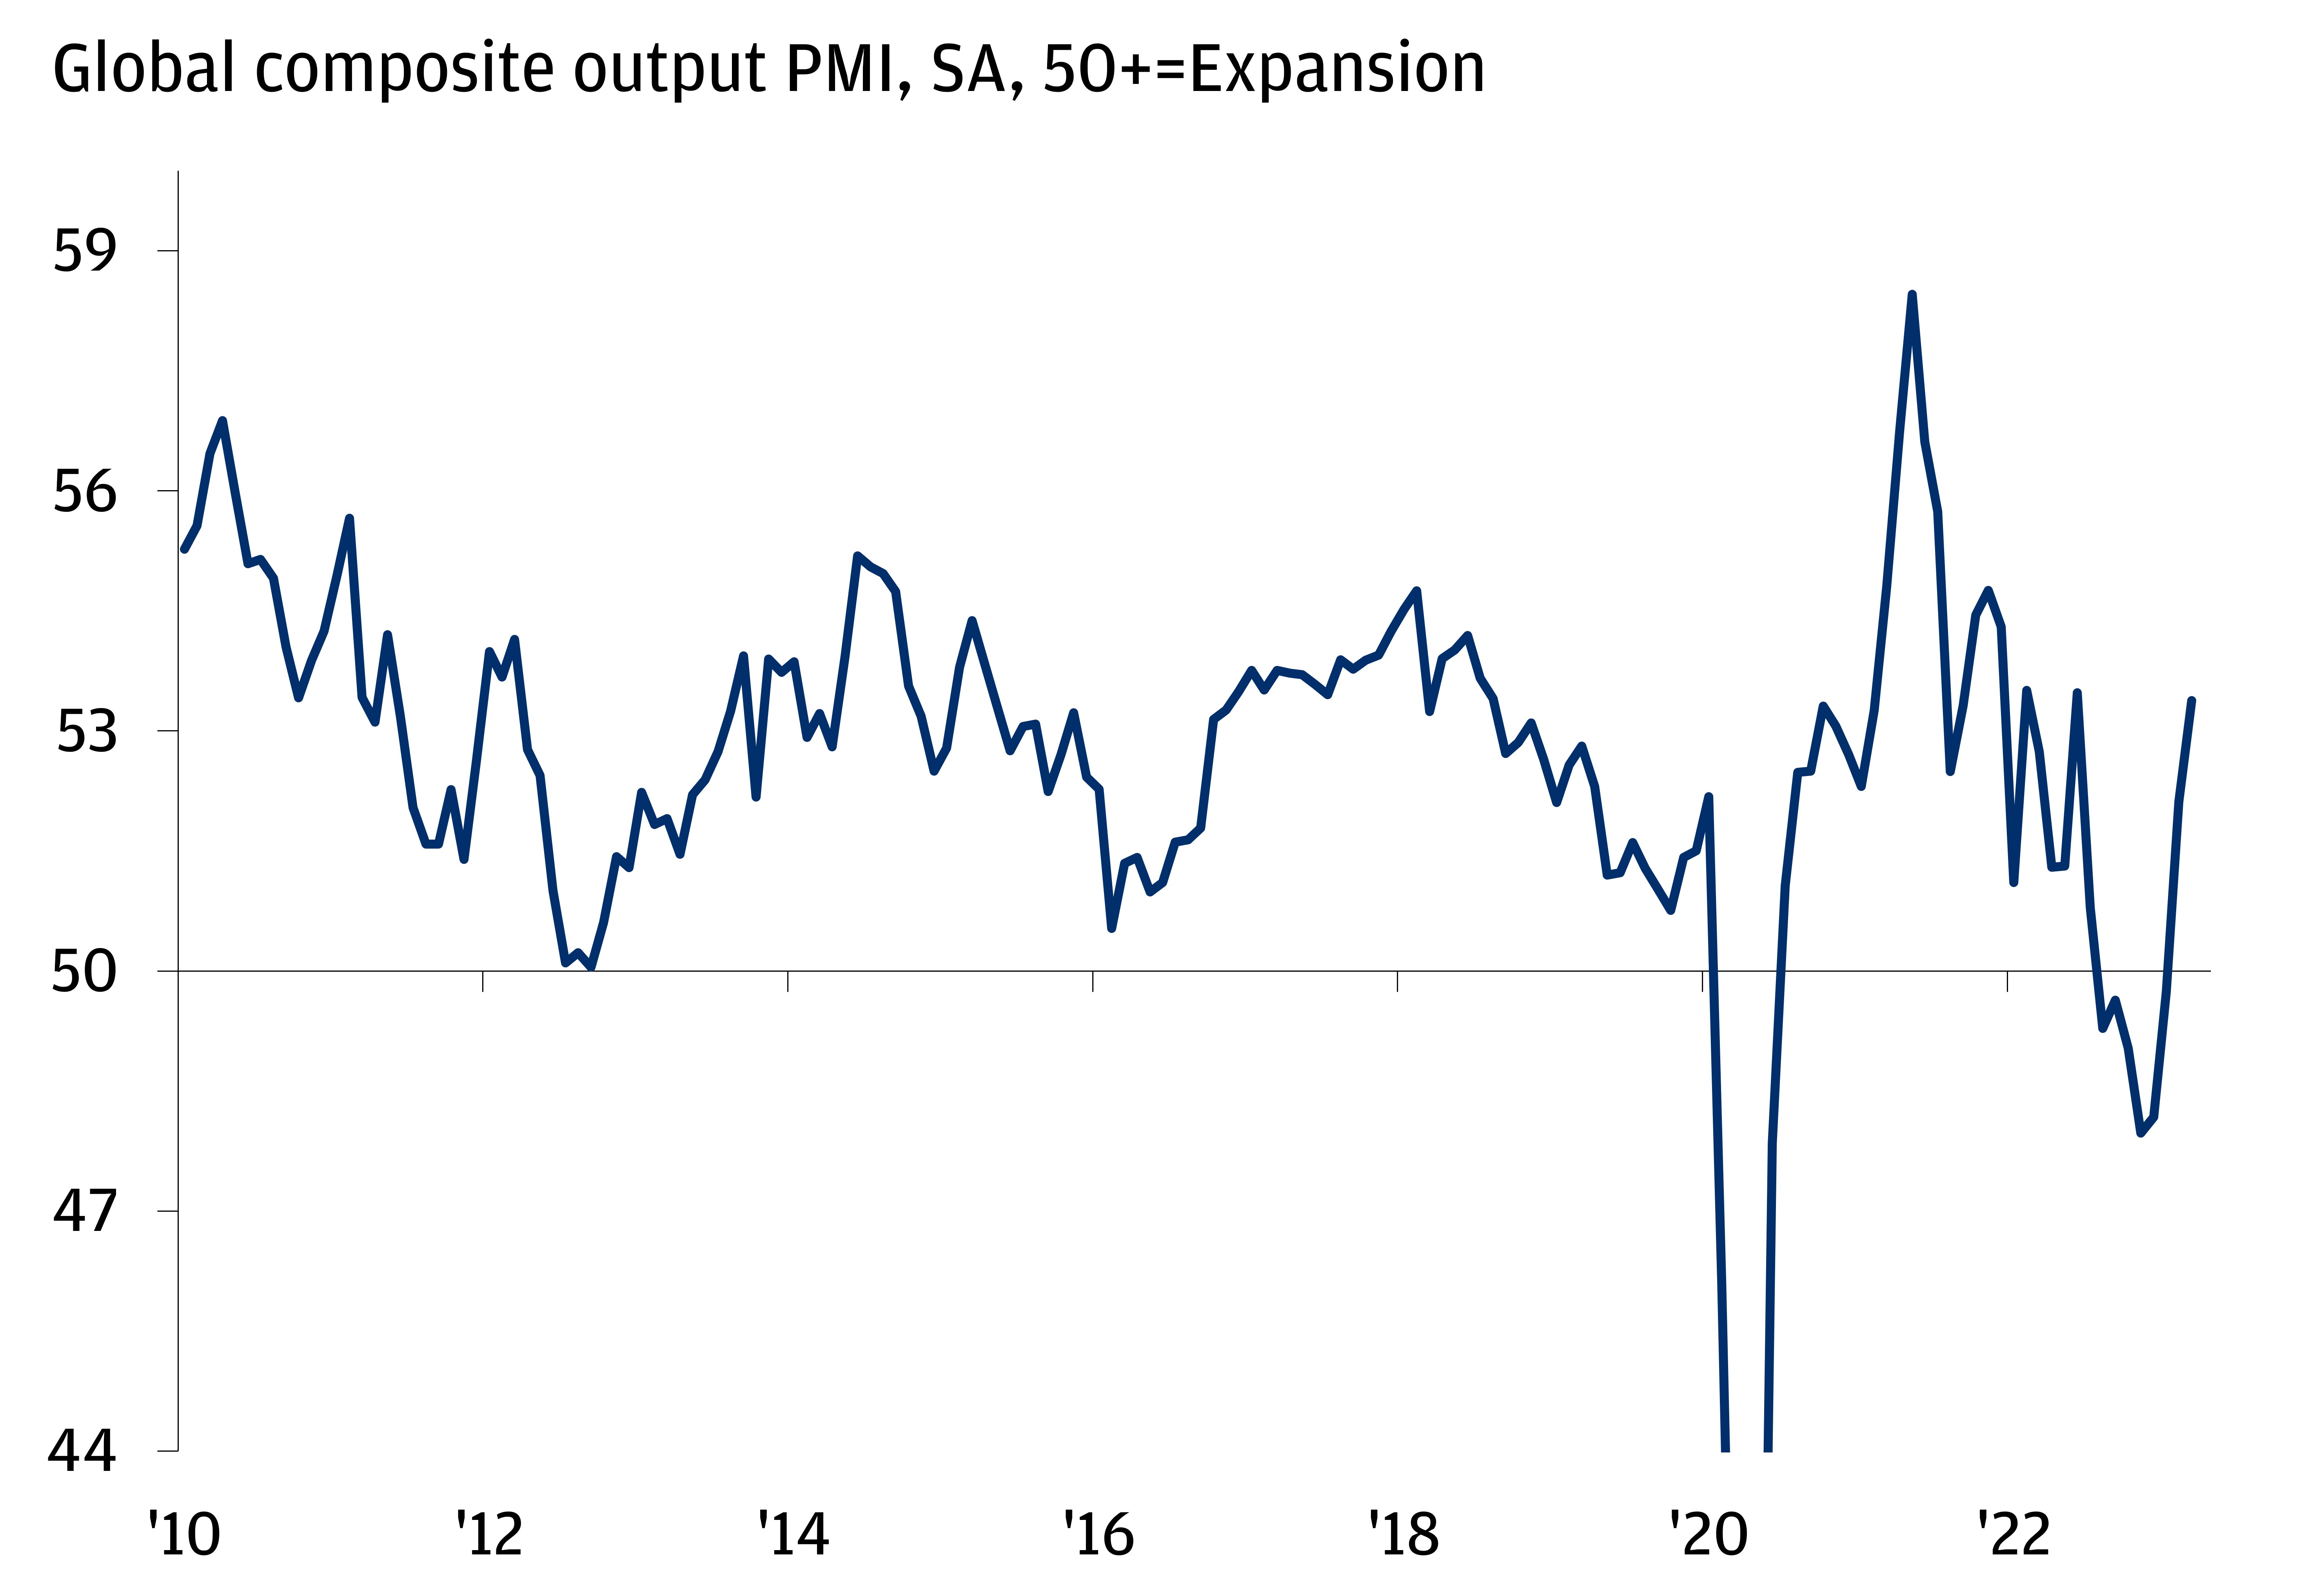 The chart describes Global PMI from January 2010 until March 2023. Values that are higher than or equal to 50 are considered expansionary.